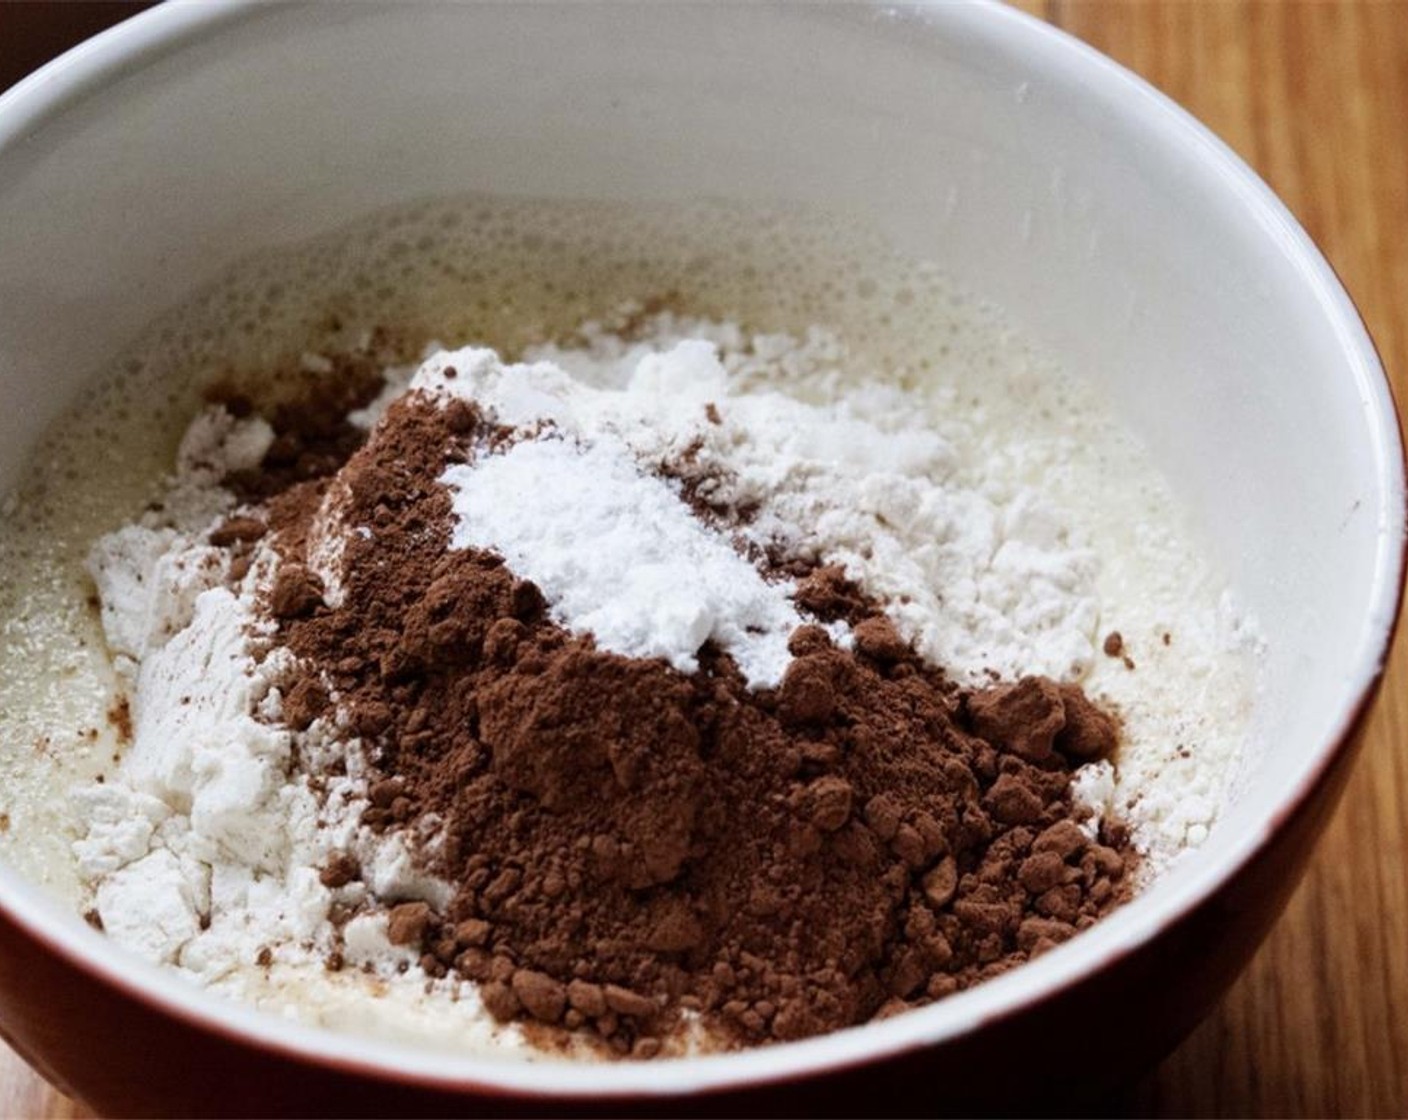 step 2 Then, add the All-Purpose Flour (1 cup) and additional All-Purpose Flour (1 Tbsp), the Baking Powder (1 tsp), Granulated Sugar (1/2 cup), and Unsweetened Cocoa Powder (2 Tbsp).